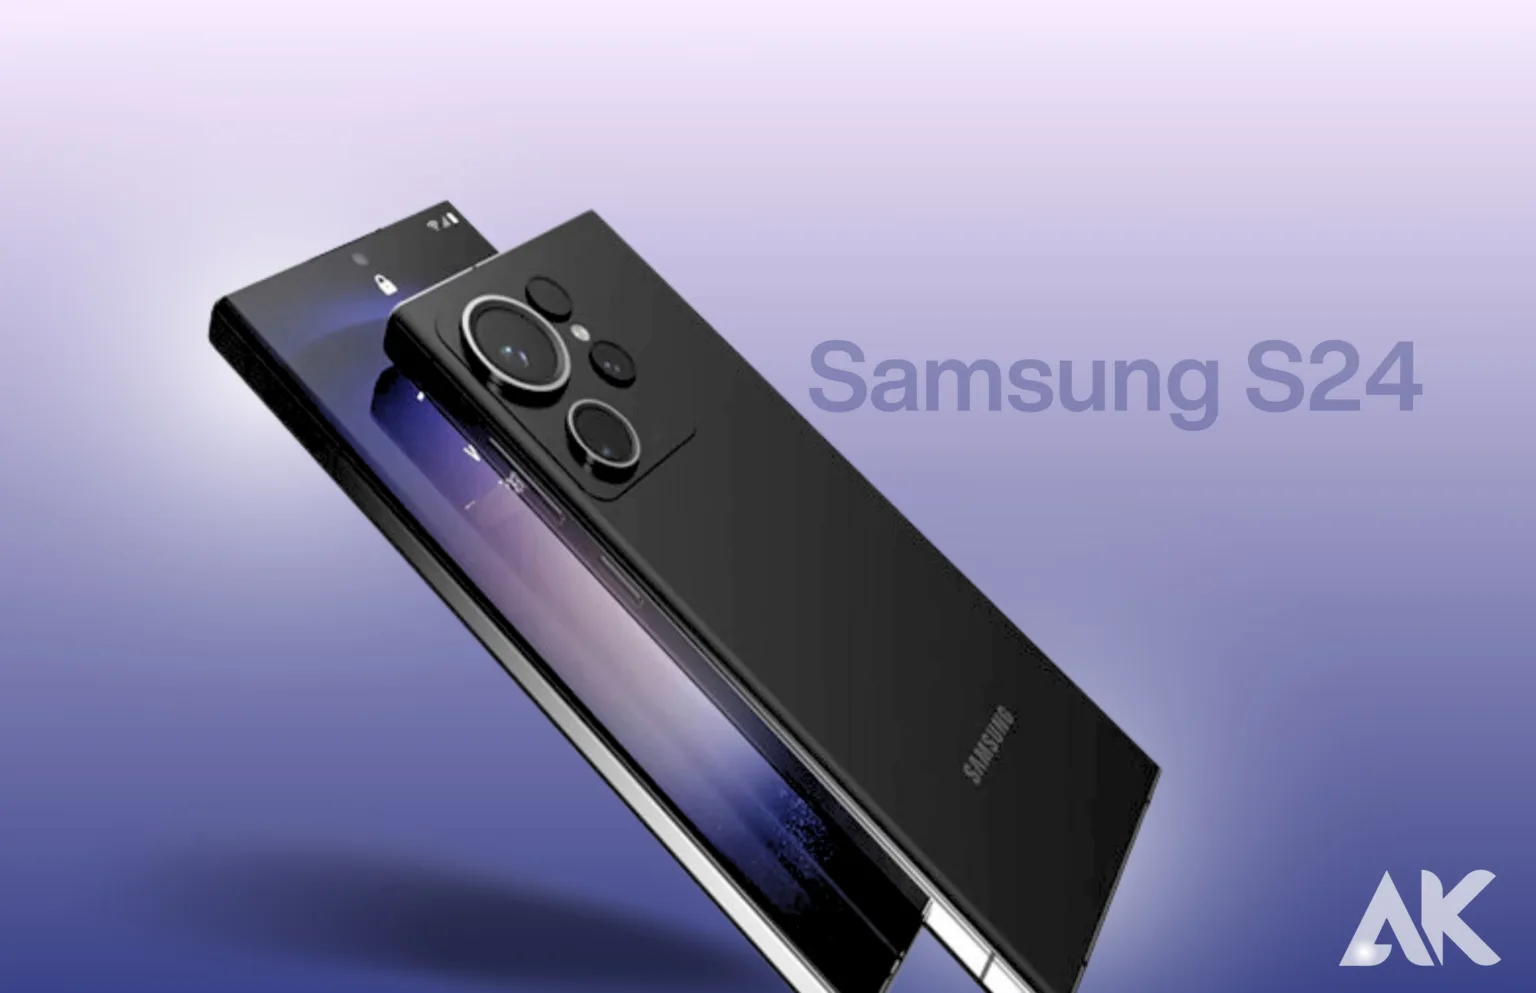 Samsung S24 Features: What to Expect From the New Flagship